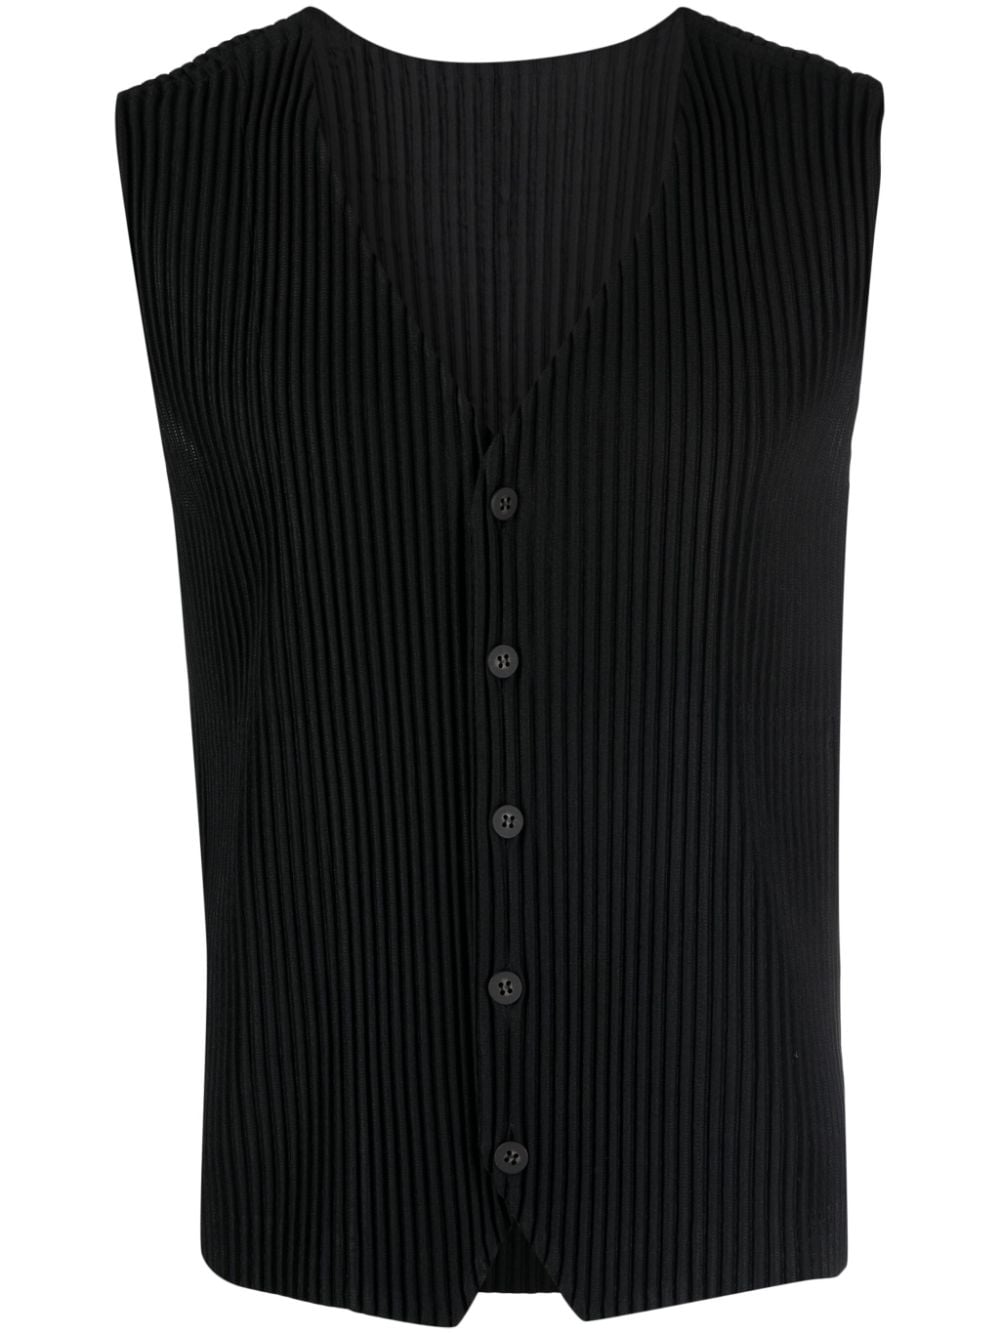 Homme Plissé Issey Miyake fully-pleated plissé vest - Black von Homme Plissé Issey Miyake